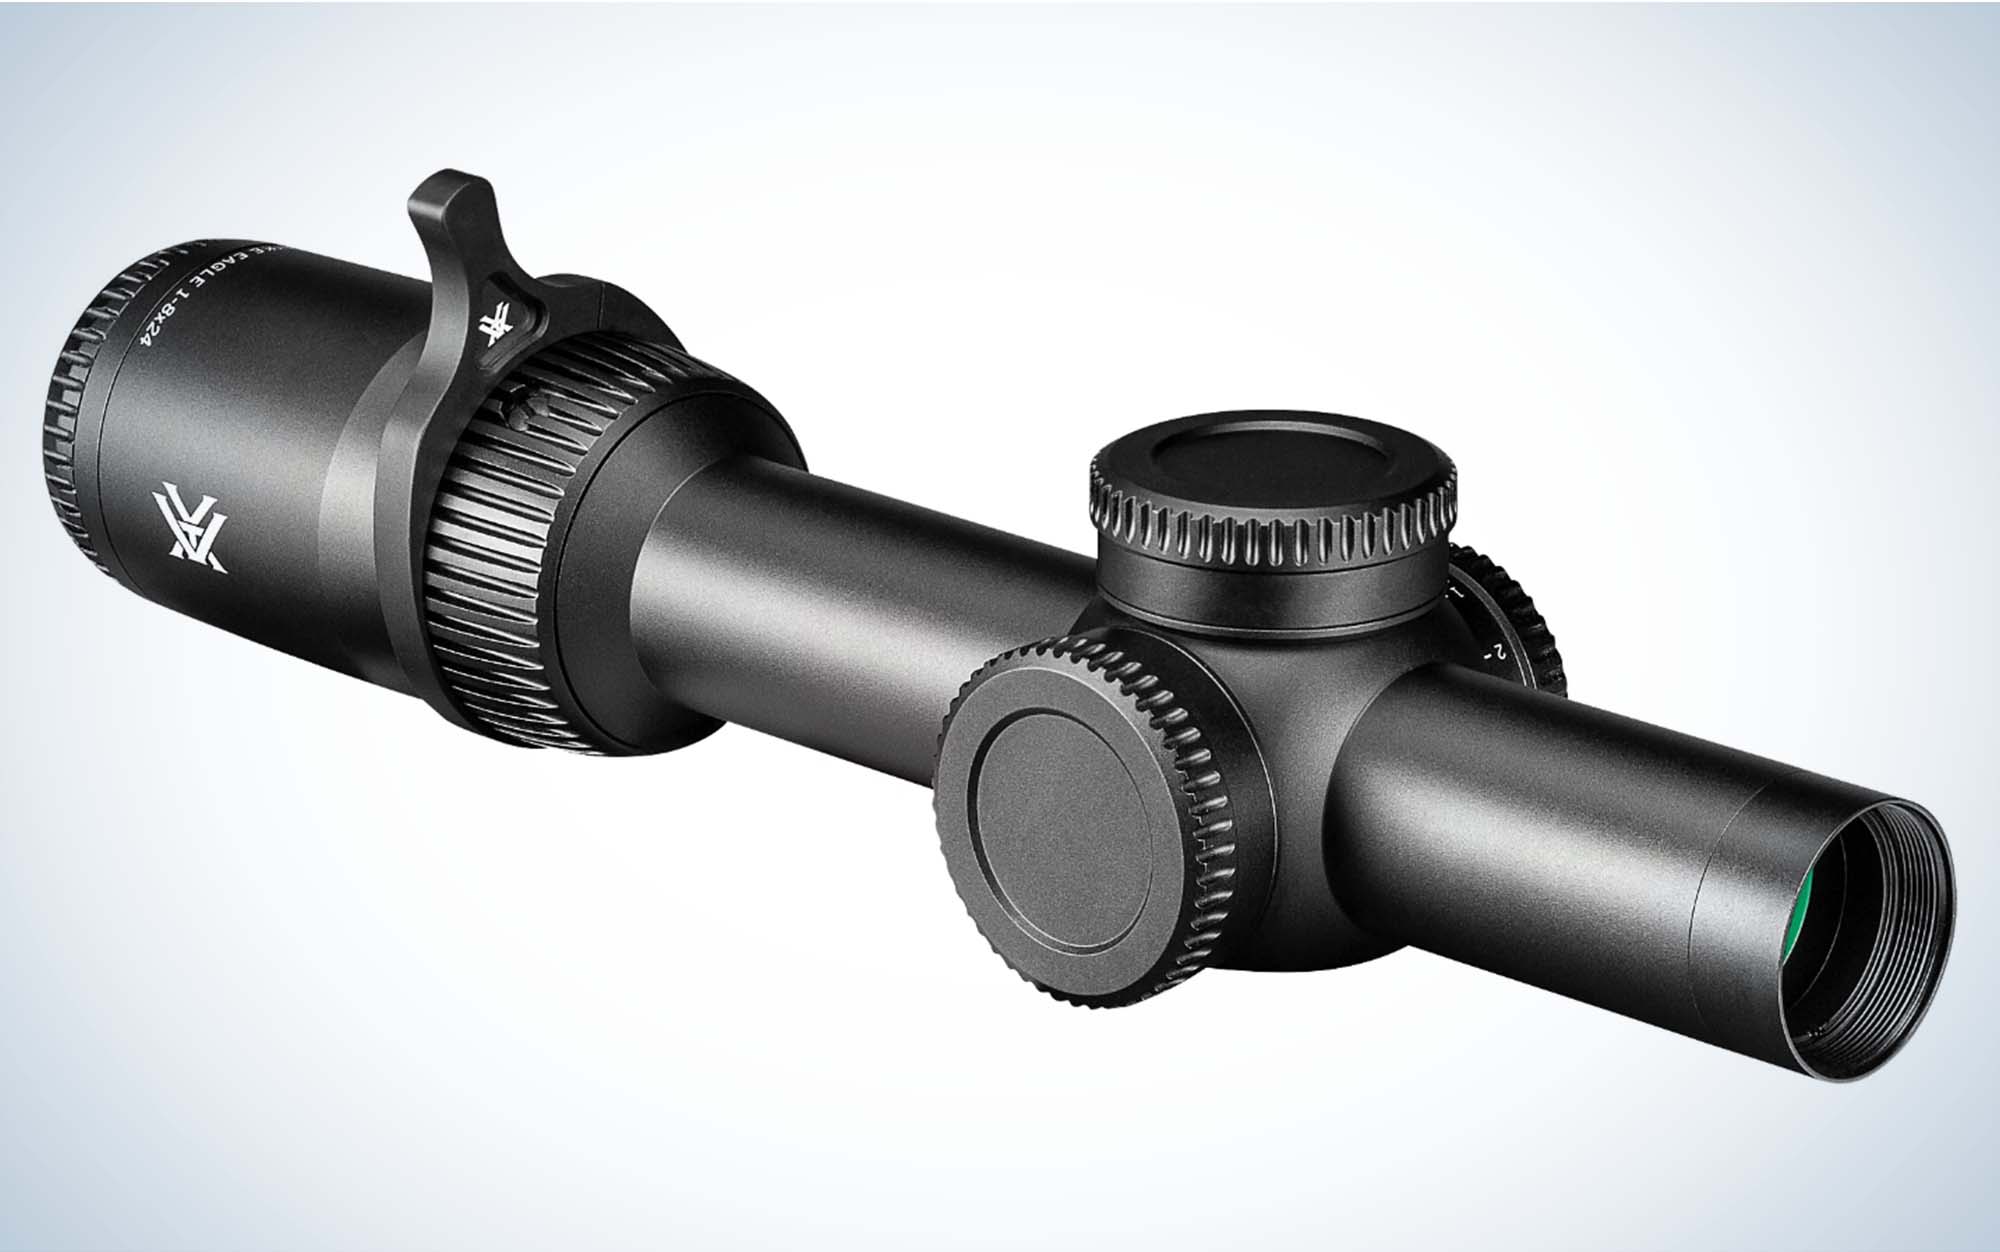 The Vortex Strike Eagle 1-8x24 is the best rifle scope for tree stands.